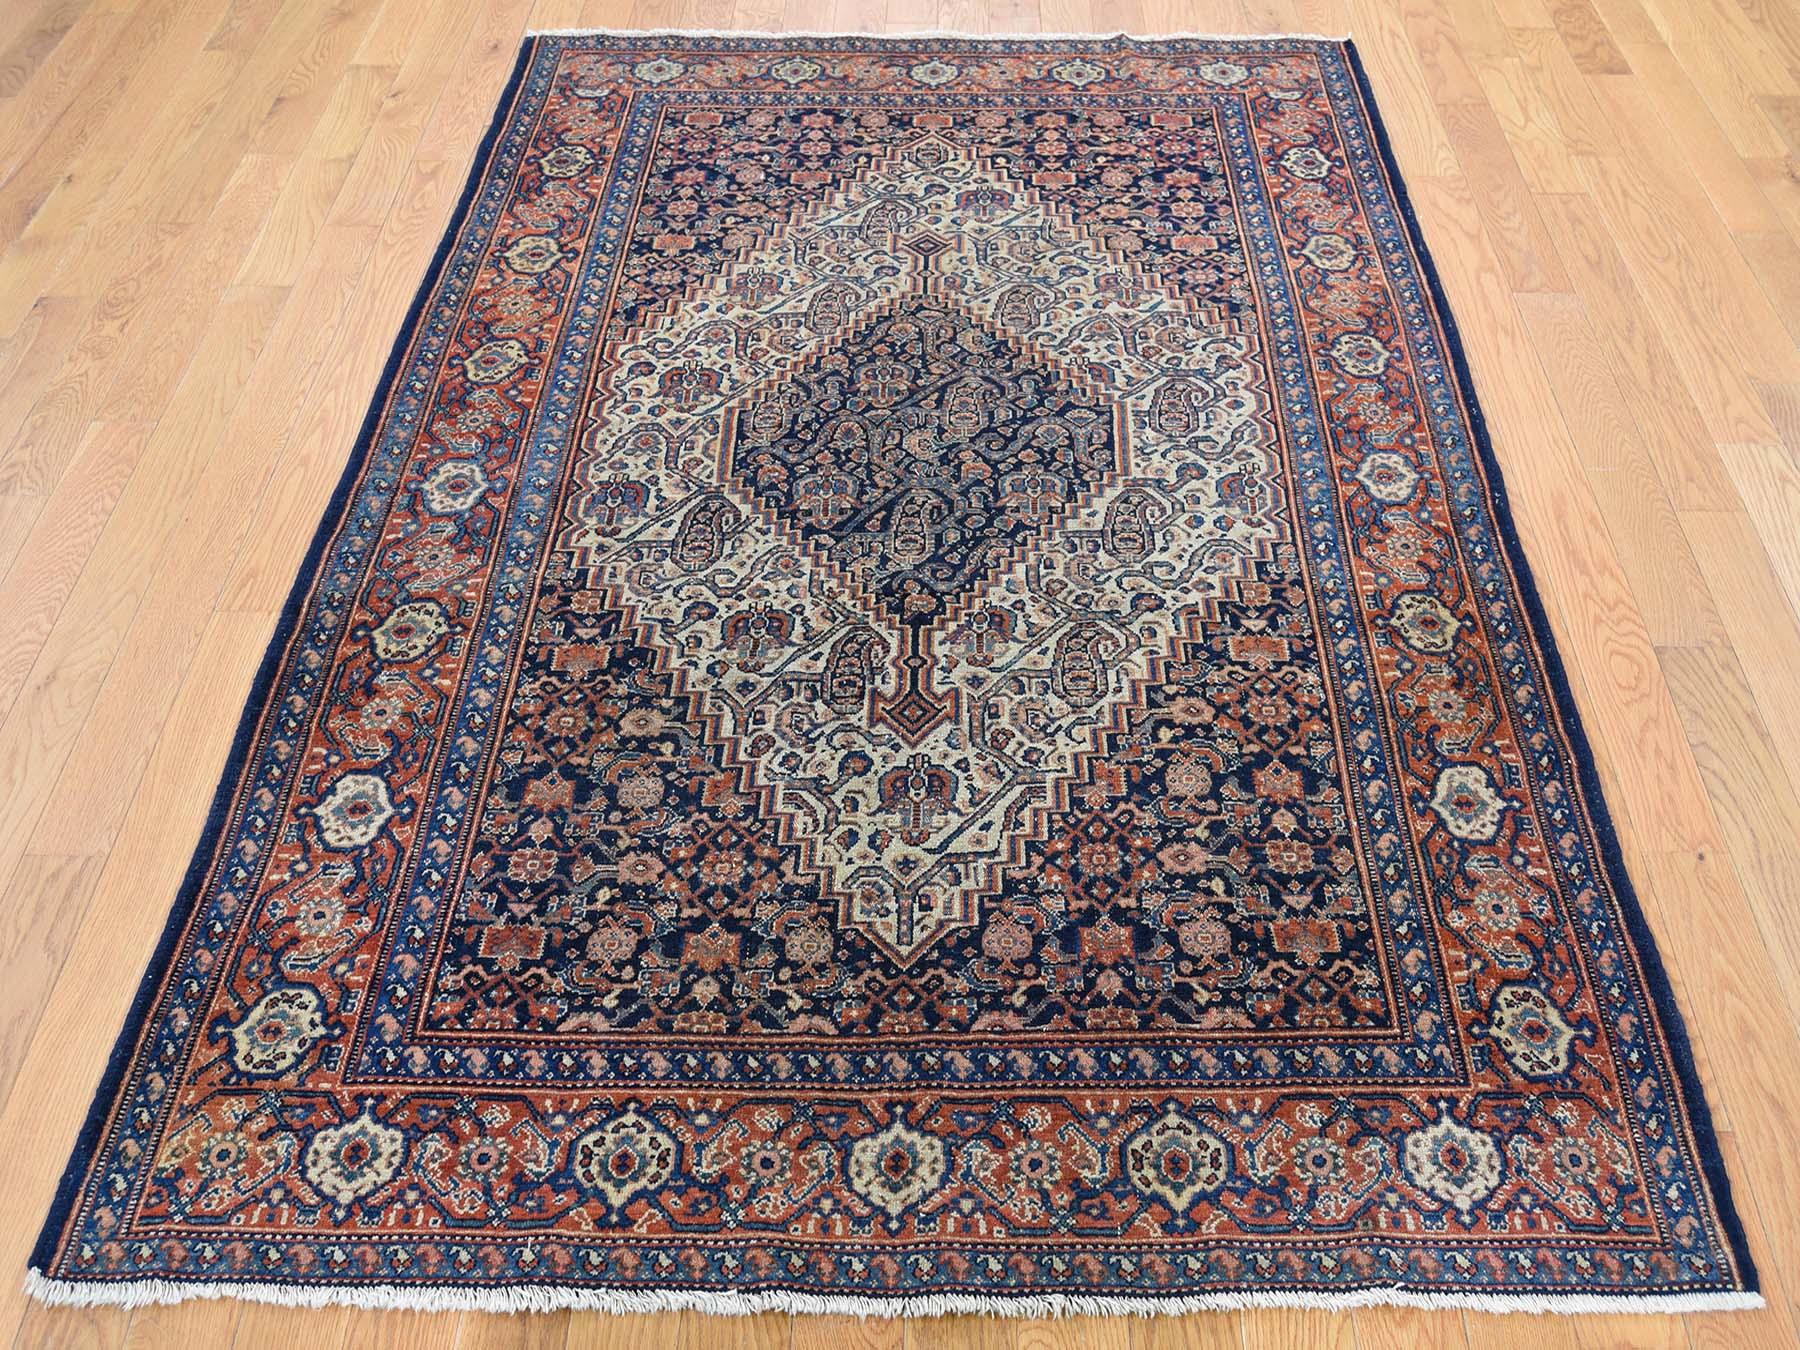 This is a genuine hand knotted oriental rug. It is not hand tufted or machine made rug. Our entire inventory is made of either hand knotted or handwoven rugs.

Revive your home style with this beautiful hand knotted Blue Antique,is an original